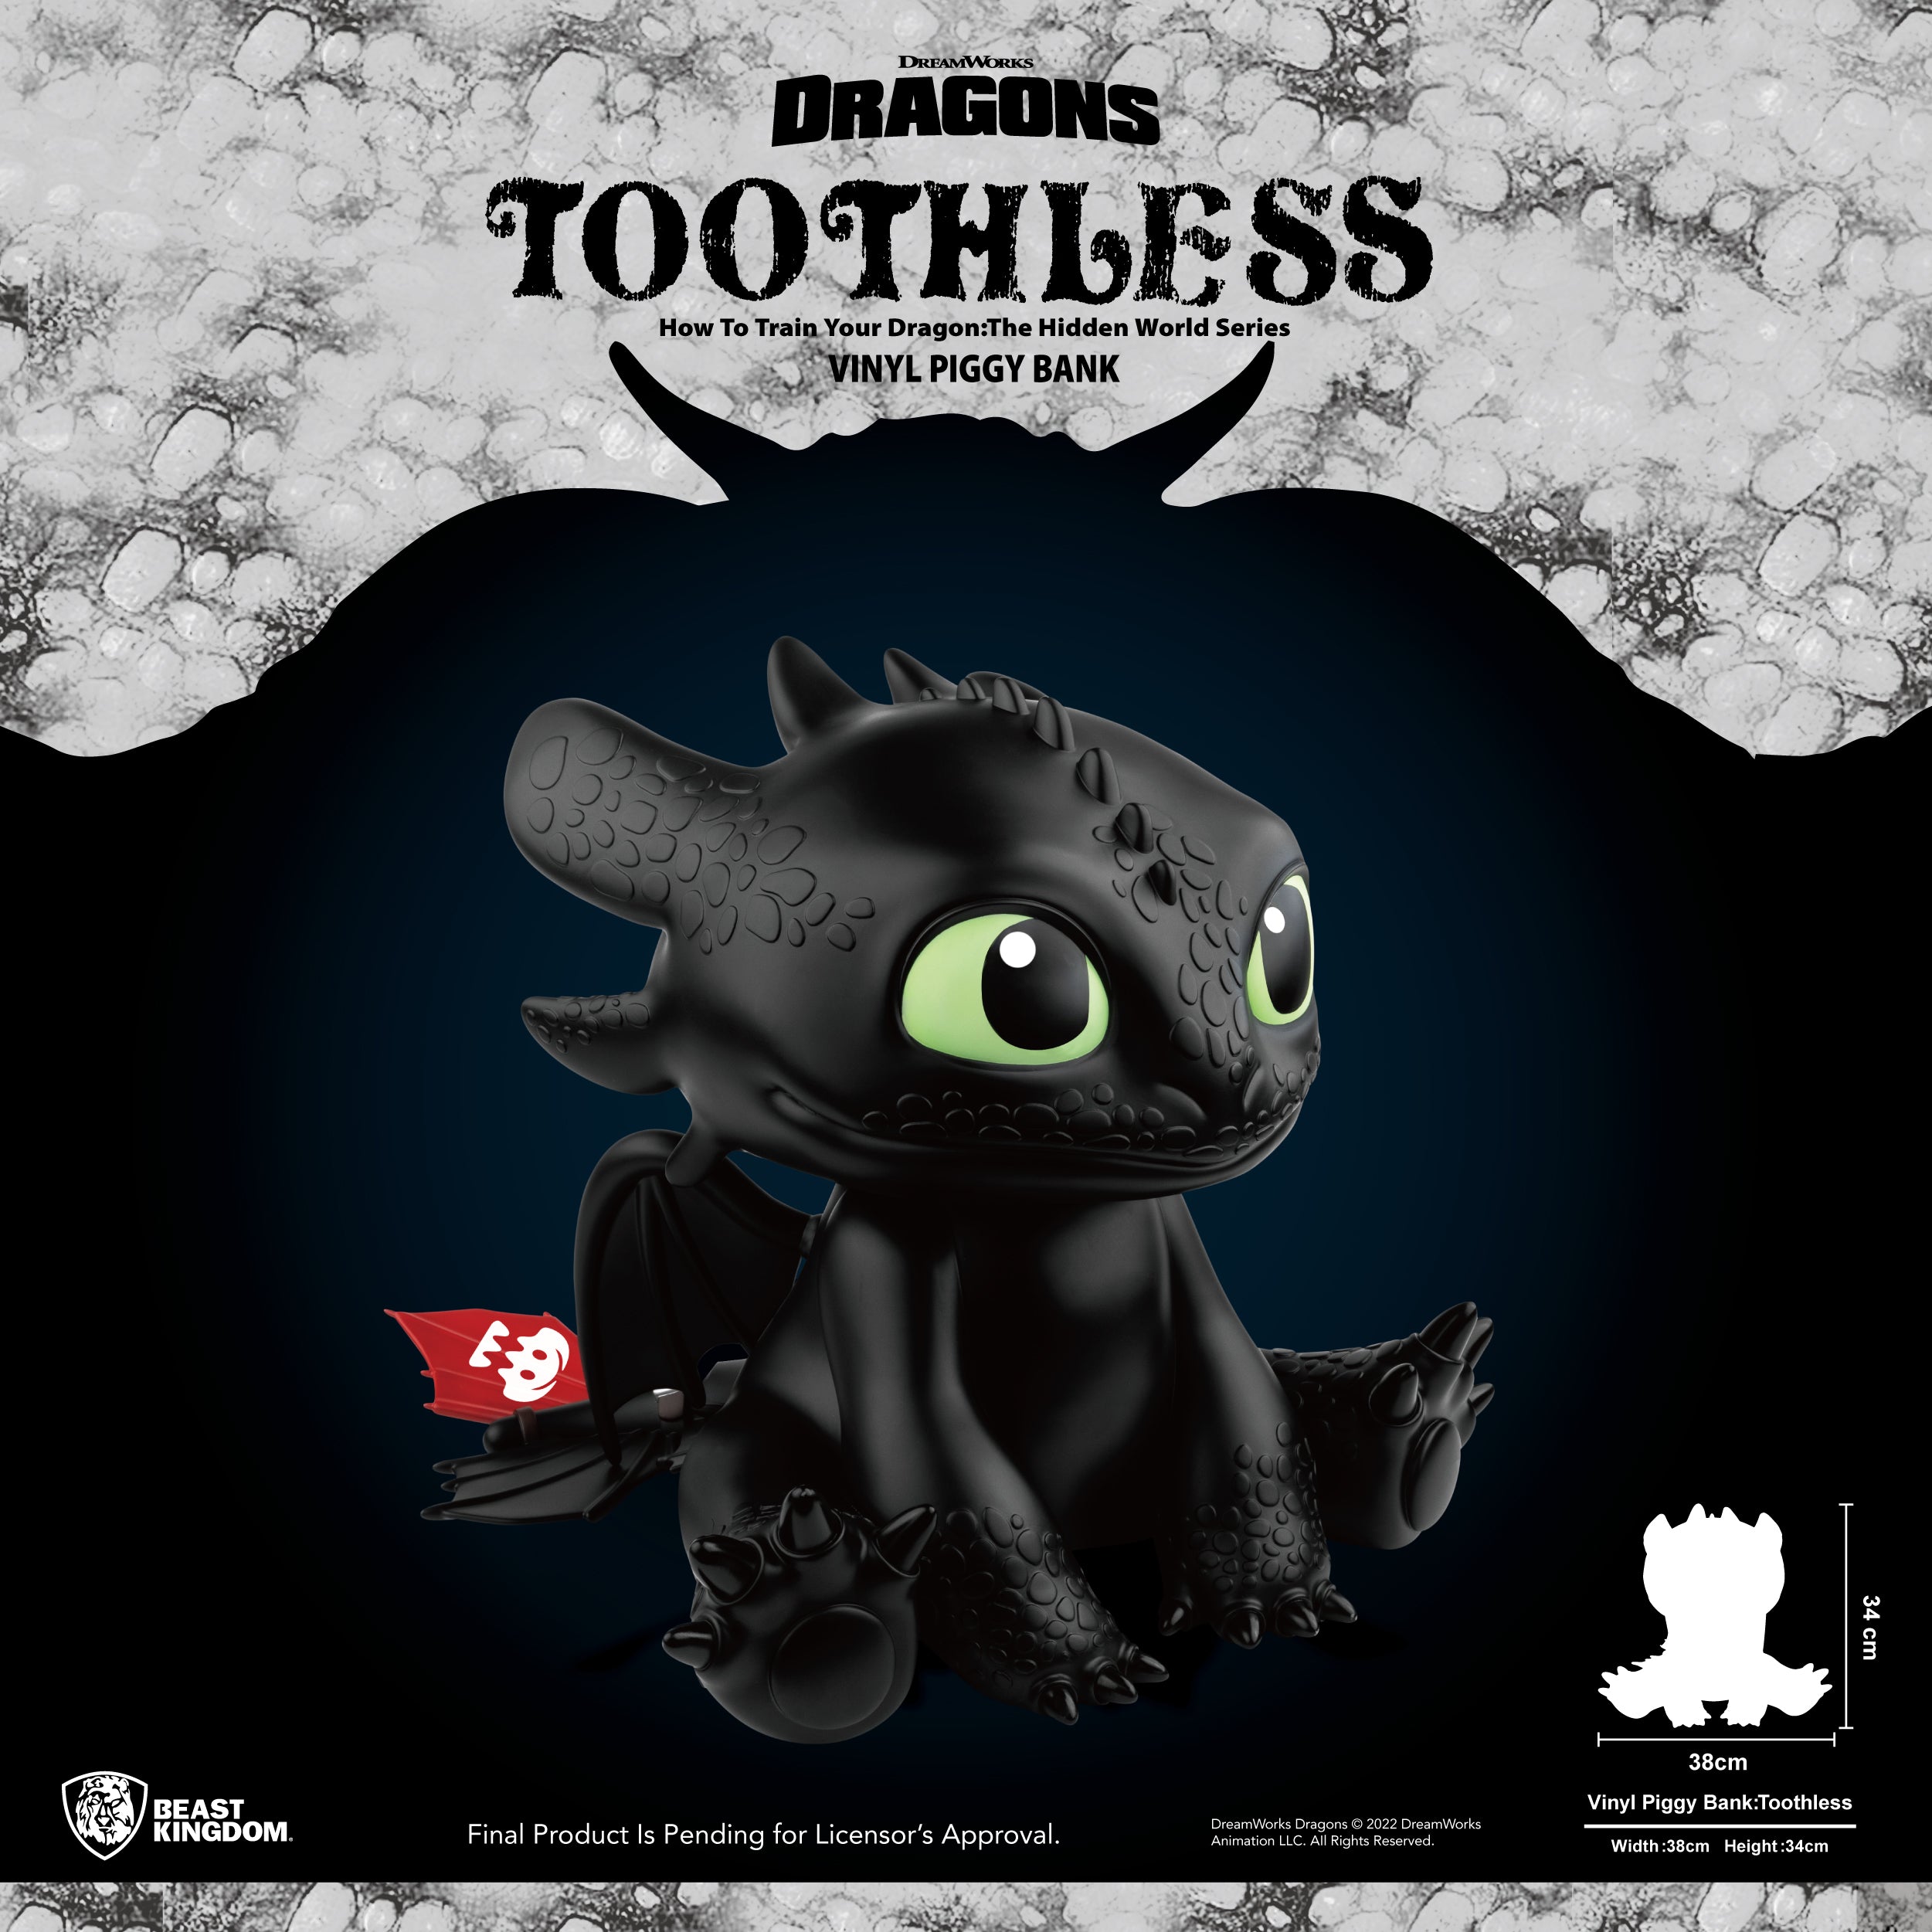 Beast Kingdom VBP-010 How to Train Your Dragon Series: Vinyl Piggy Bank Toothless